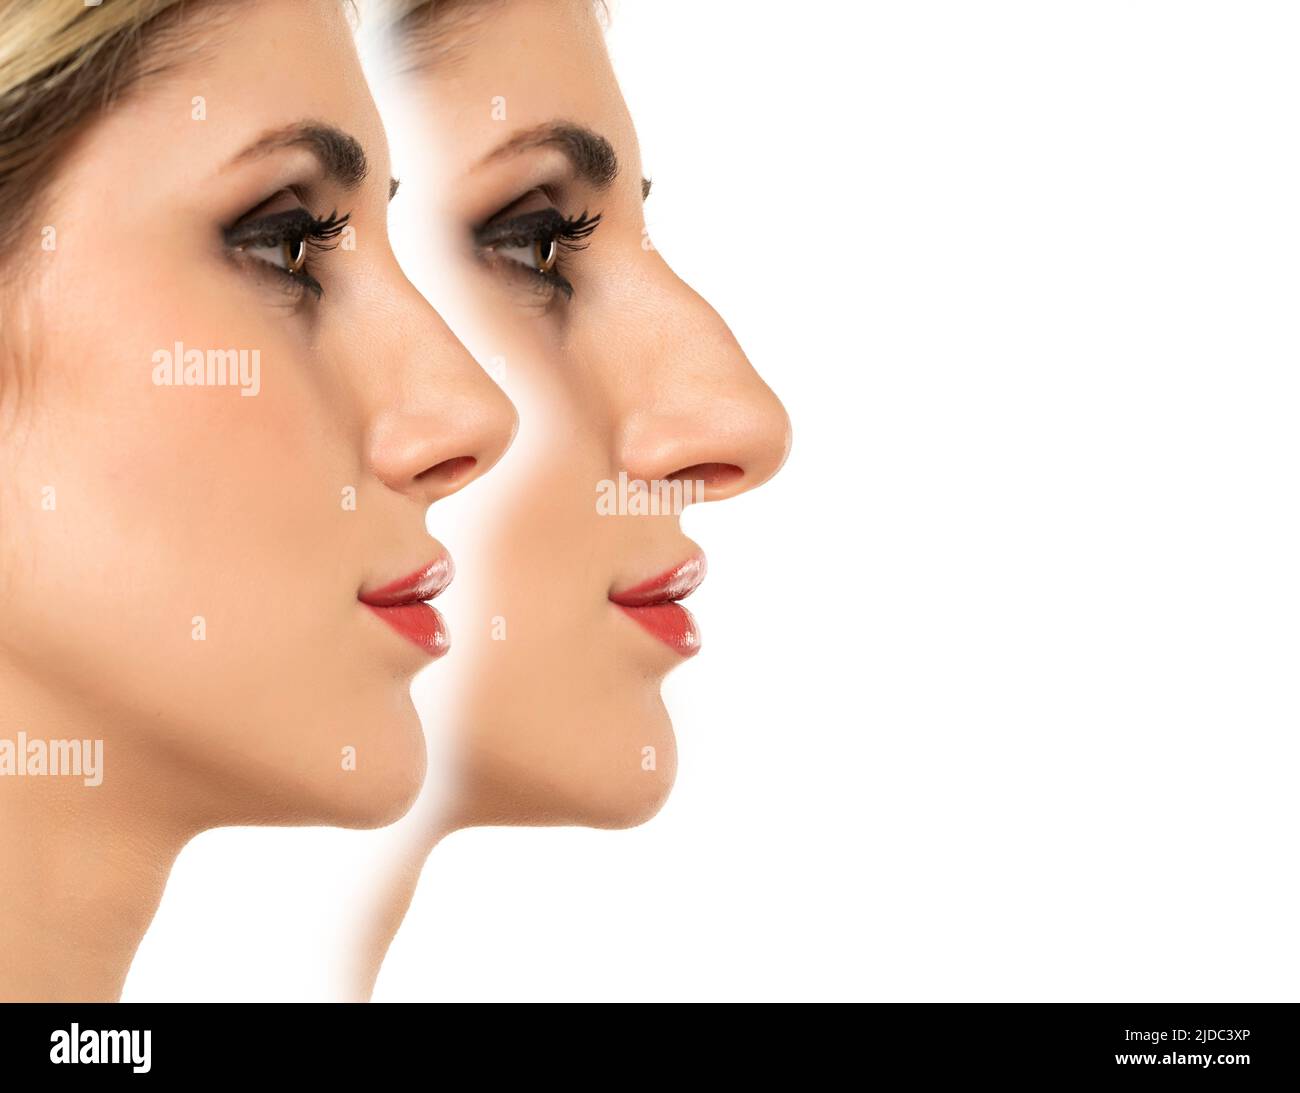 Young woman before and after plastic surgery of the nose on a white background. Stock Photo